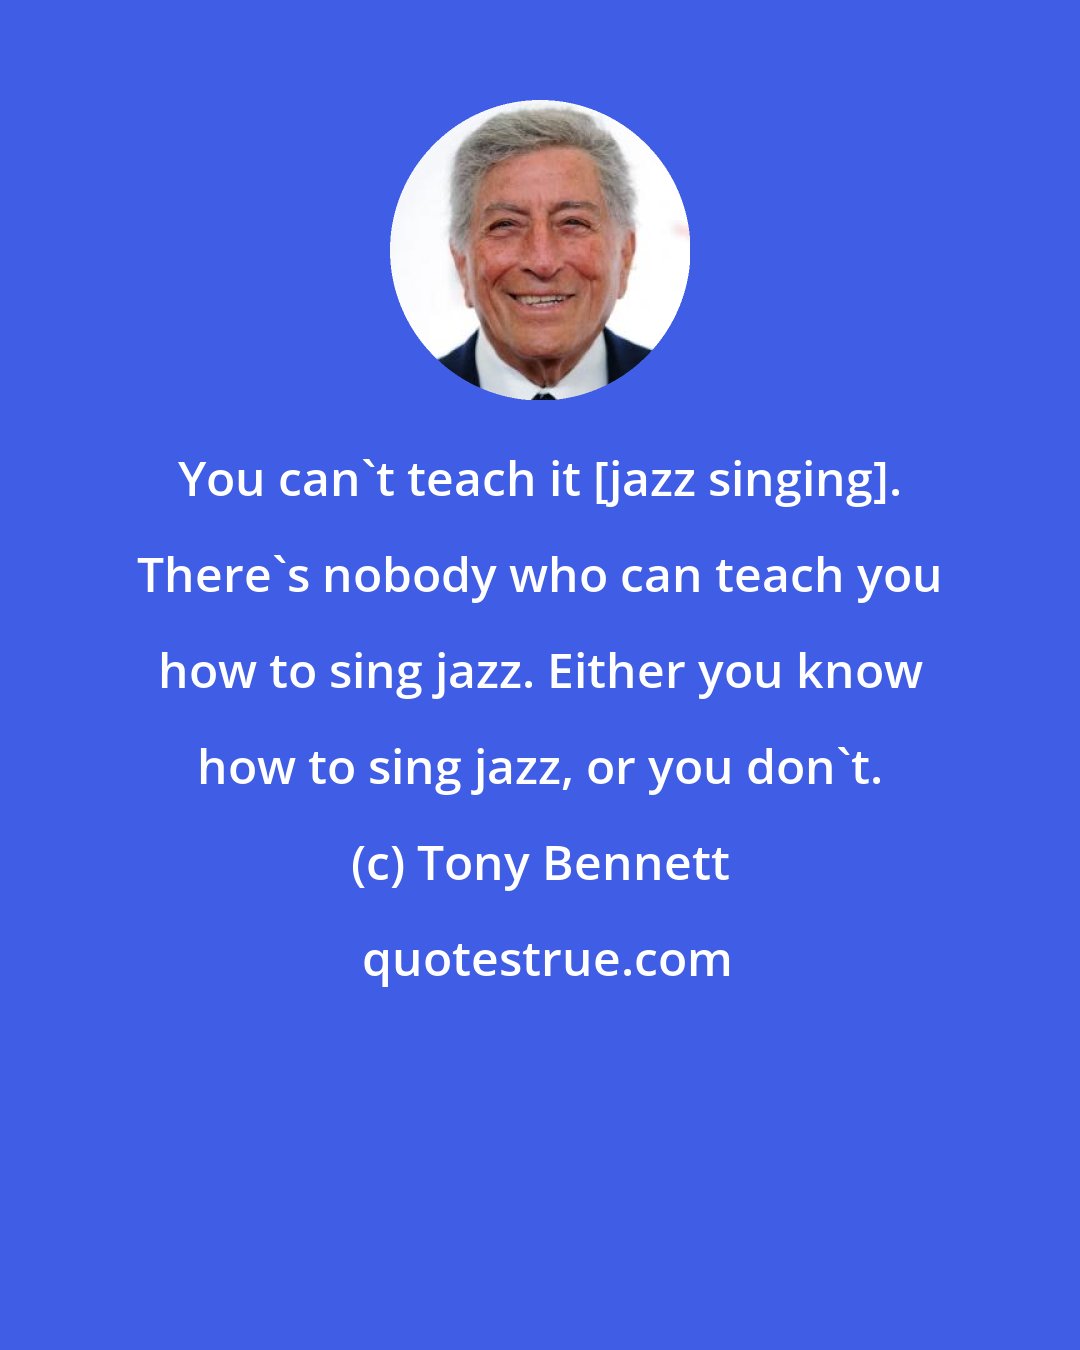 Tony Bennett: You can't teach it [jazz singing]. There's nobody who can teach you how to sing jazz. Either you know how to sing jazz, or you don't.